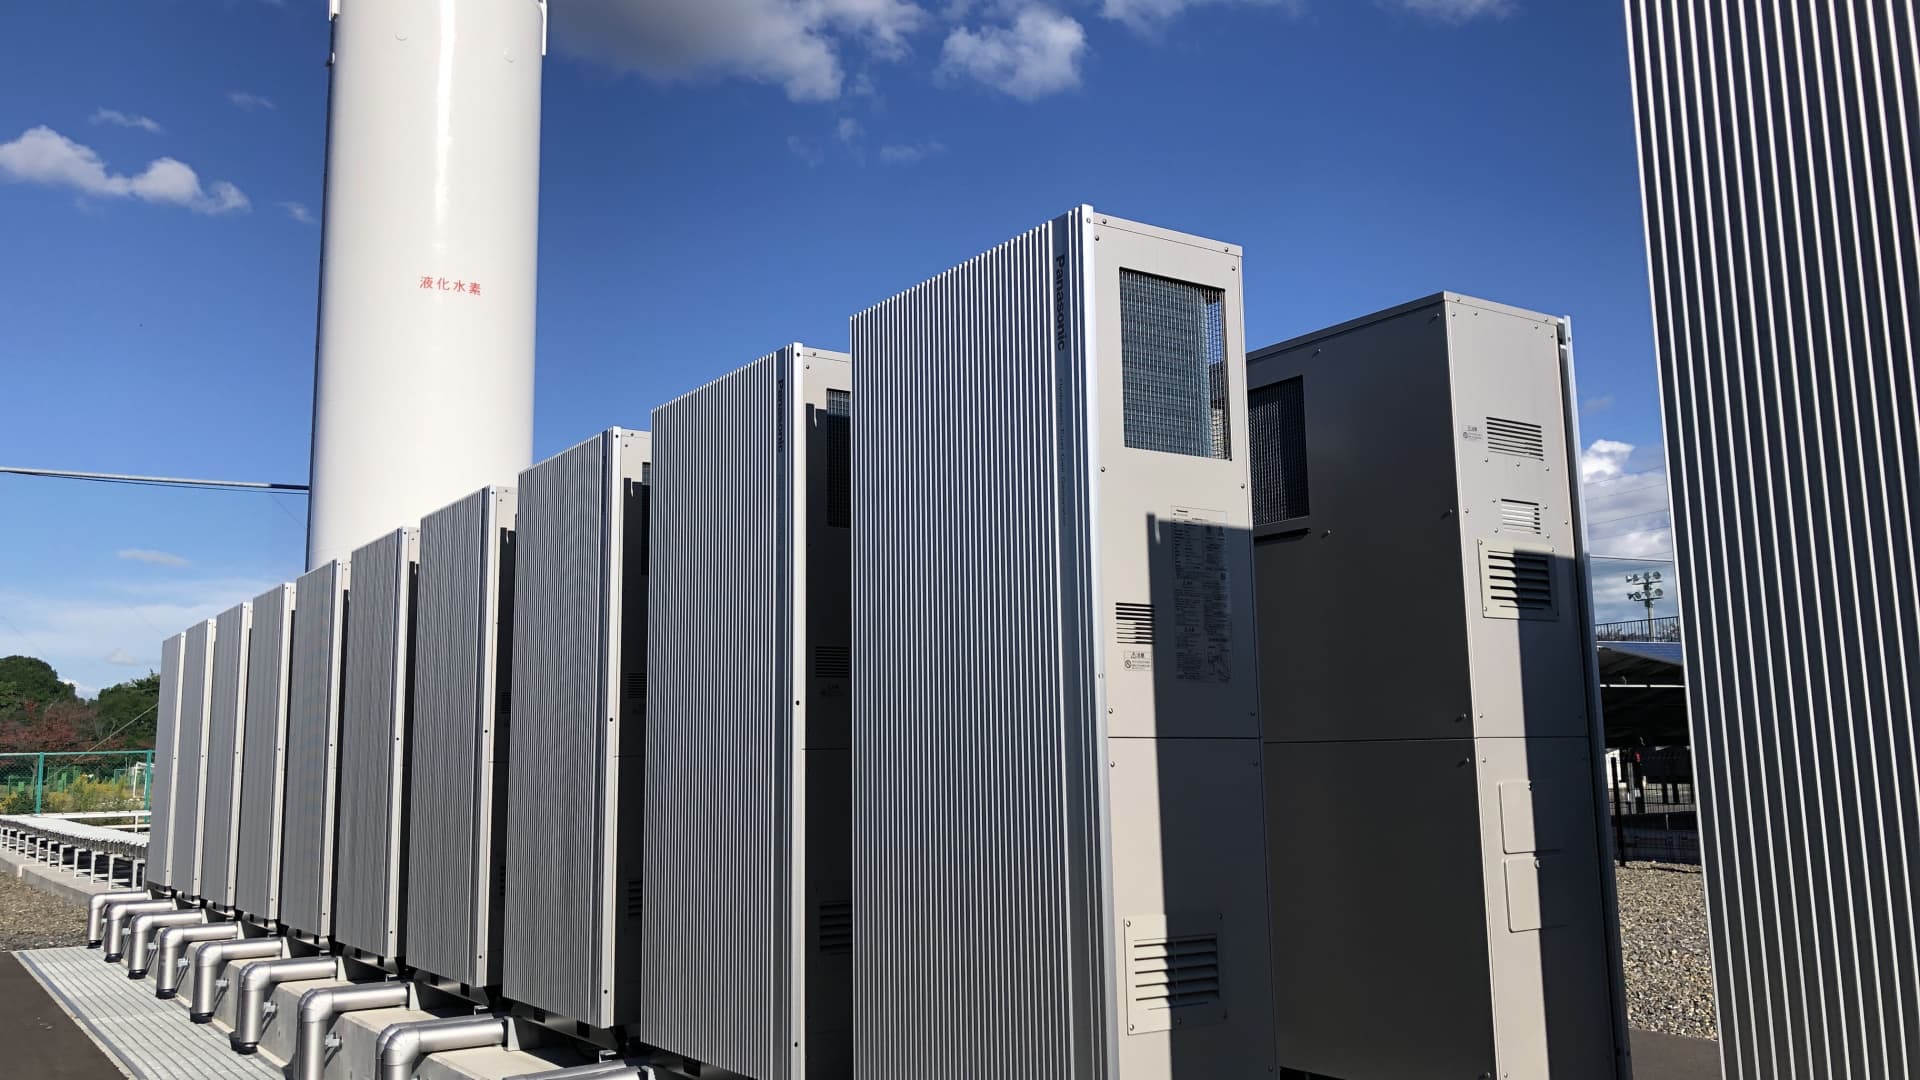 The 495kilowatt hydrogen fuel cell array is made up of 99 5KW fuel cells. Panasonic says it's the world's first site of its kind to use hydrogen fuel cells with the aim of creating a manufacturing plant running on 100% renewable energy.